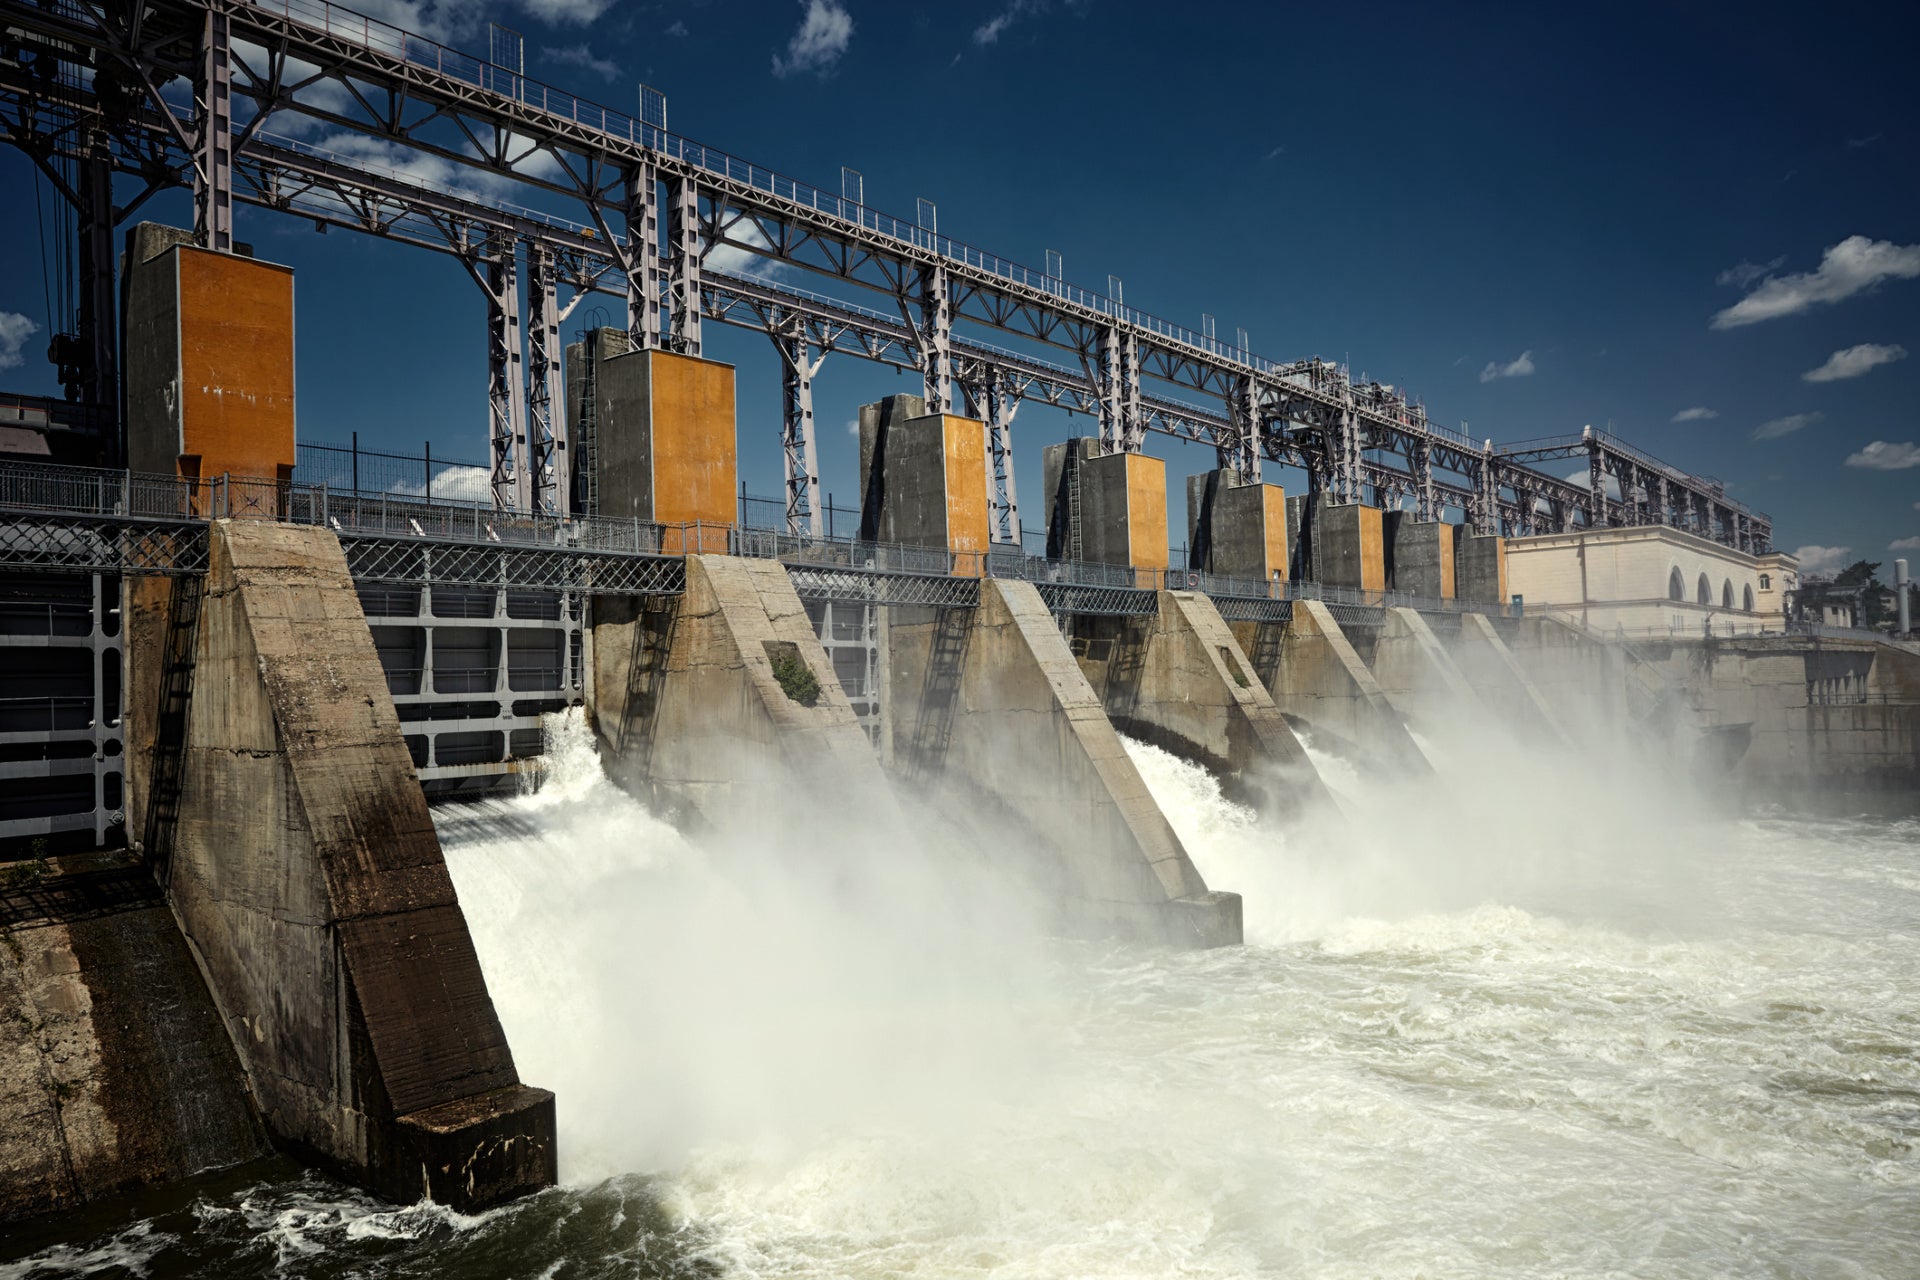 A Perspective on Hydro Power